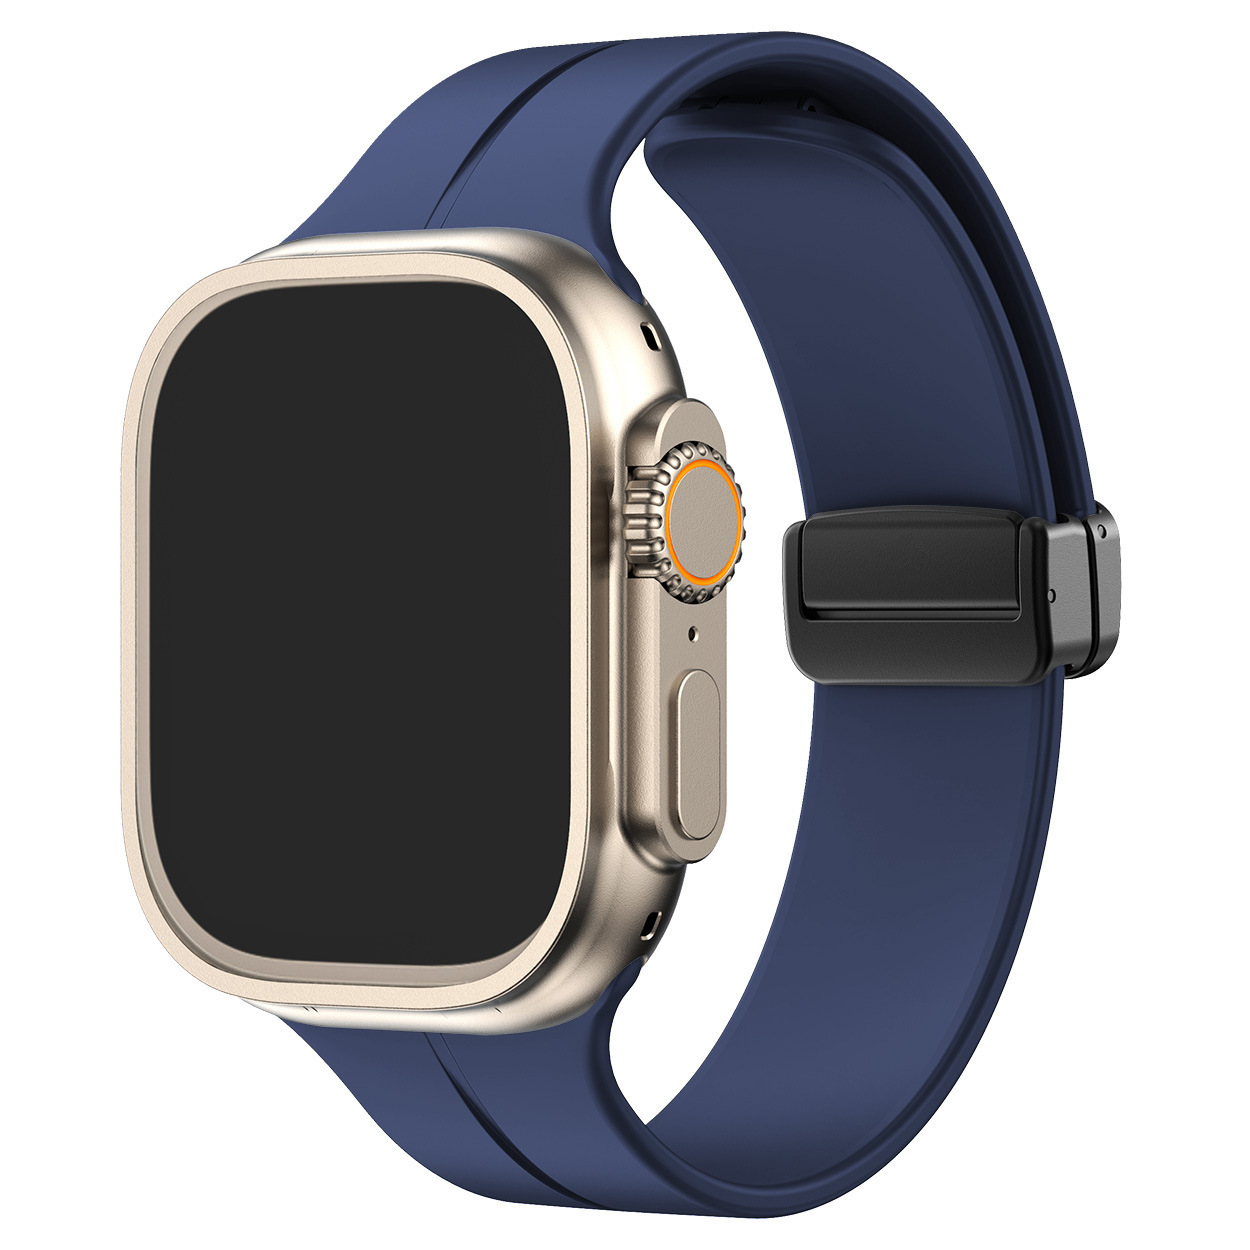 FlexiFit™ Magnetic Band for Apple Watch - BUY 1 GET 1 FREE!